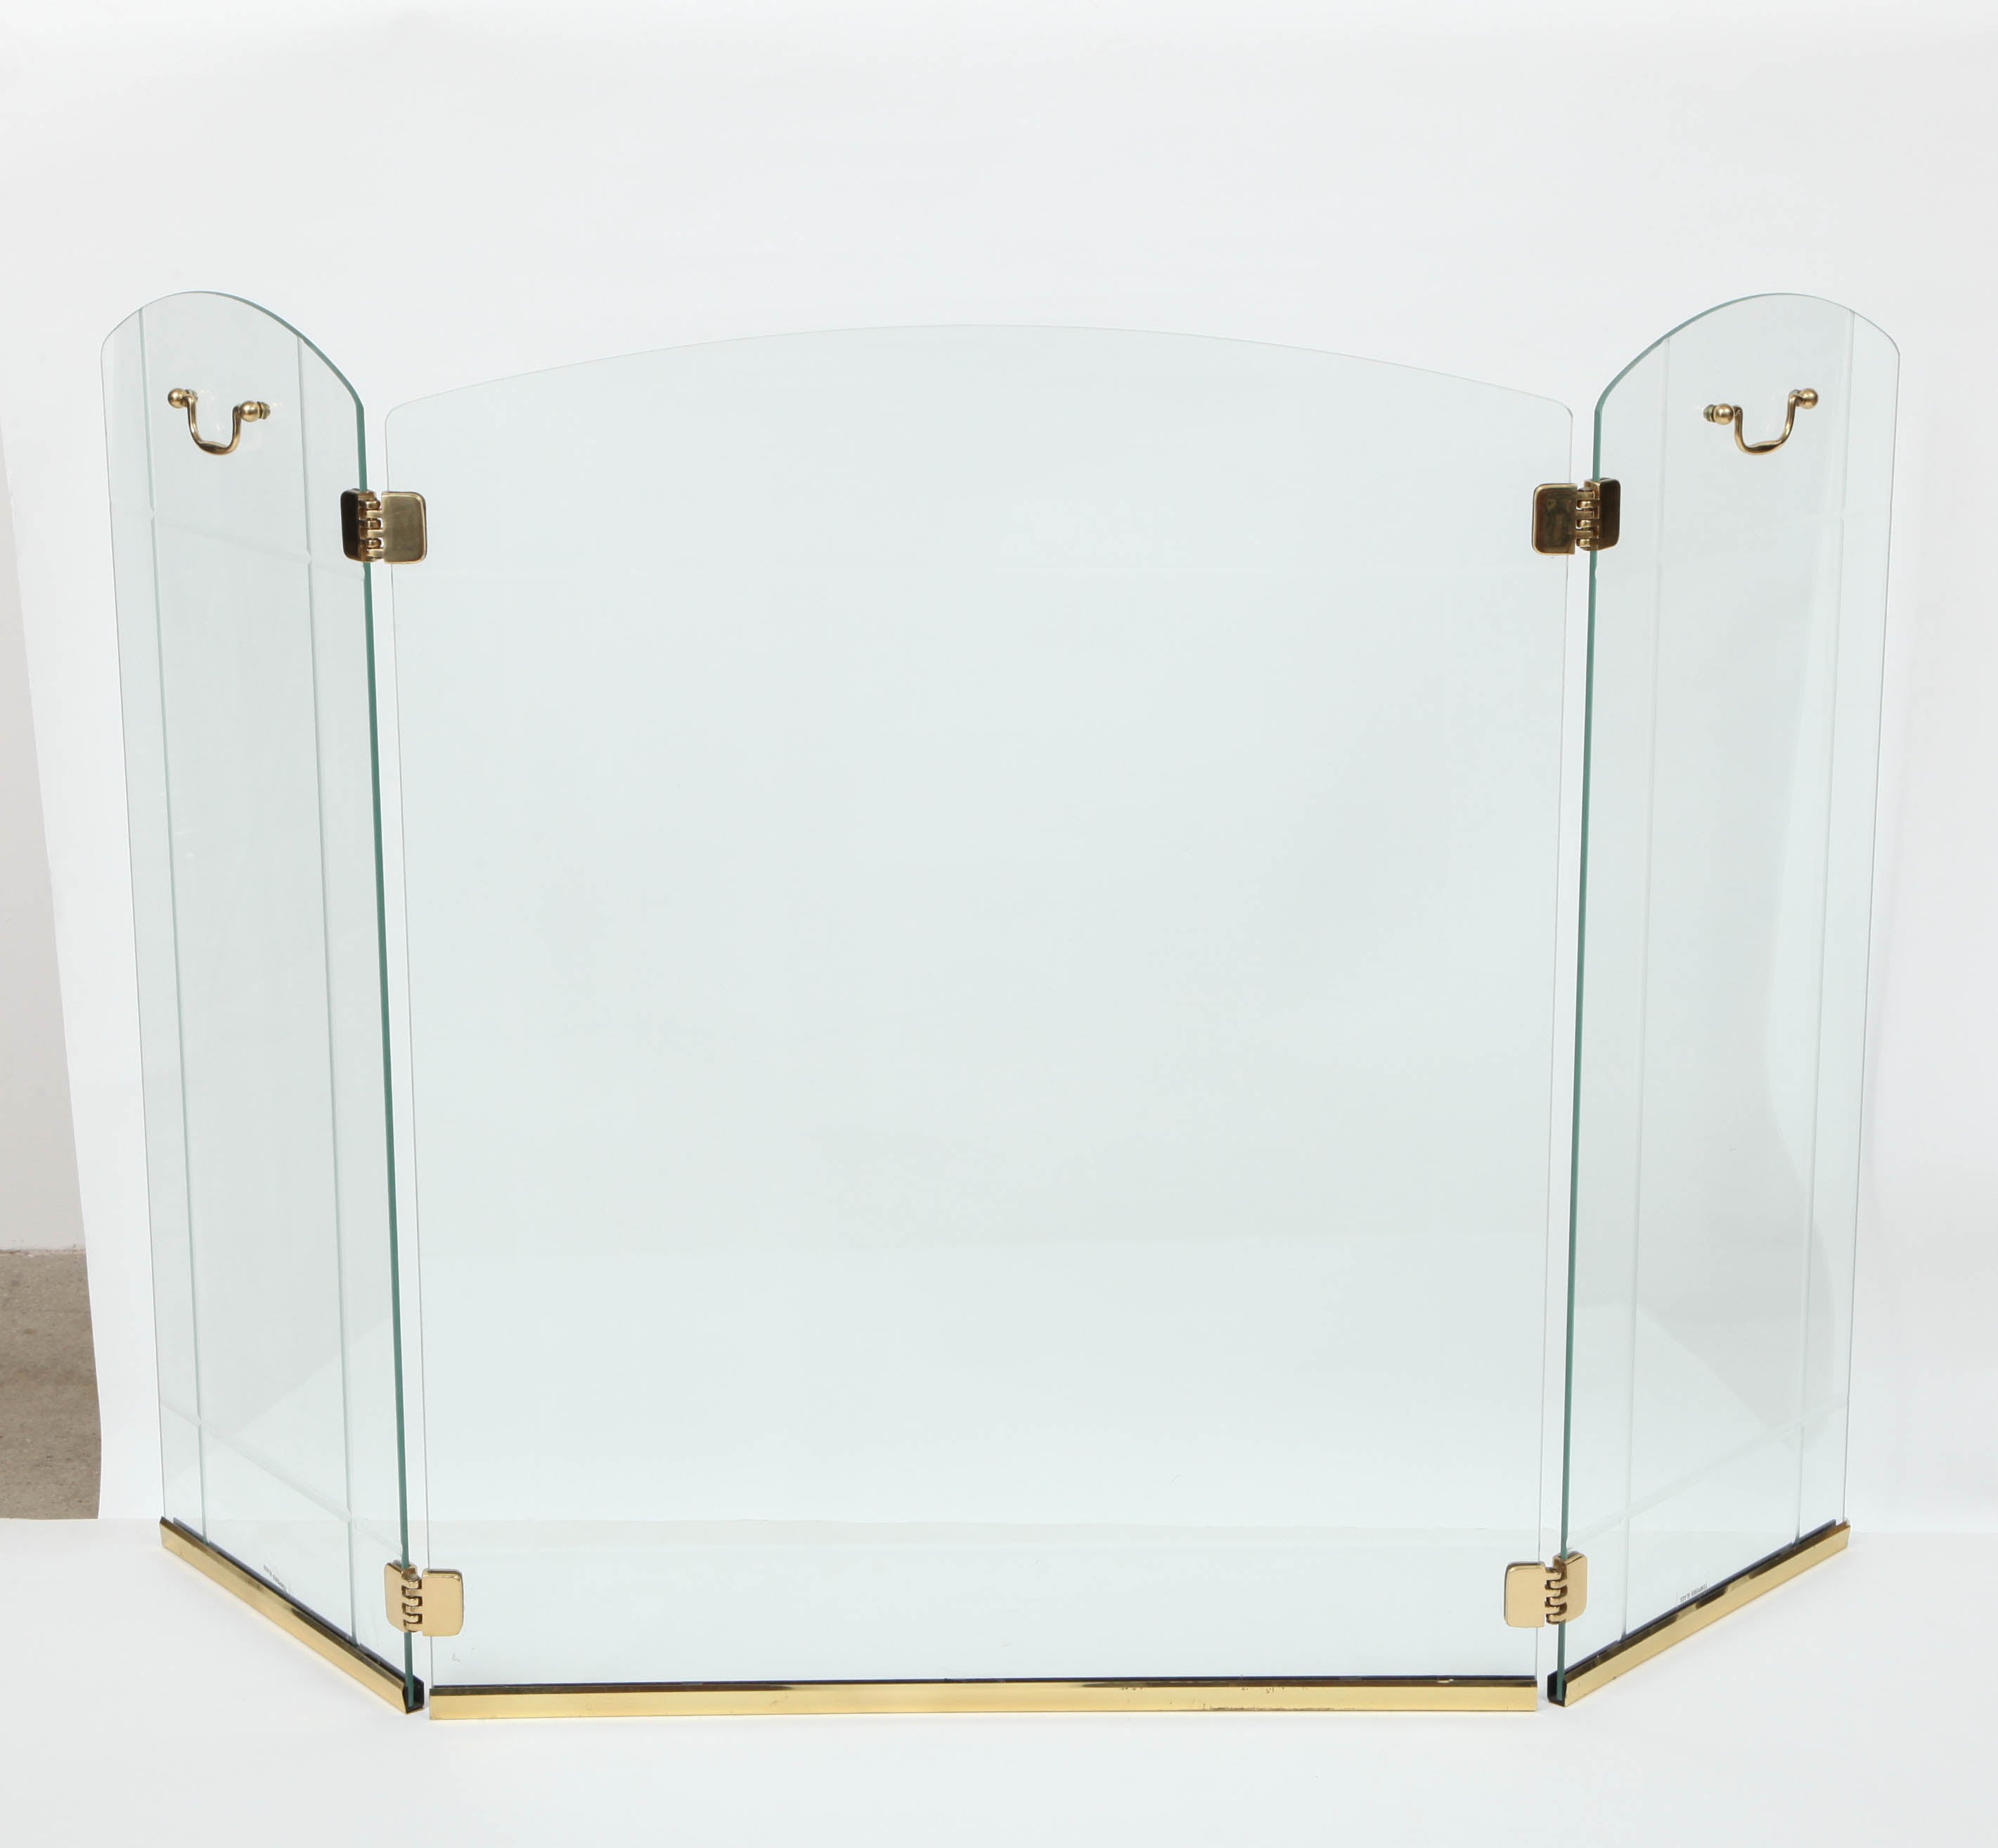 Glass and Brass Firescreen, style of Pace Collection